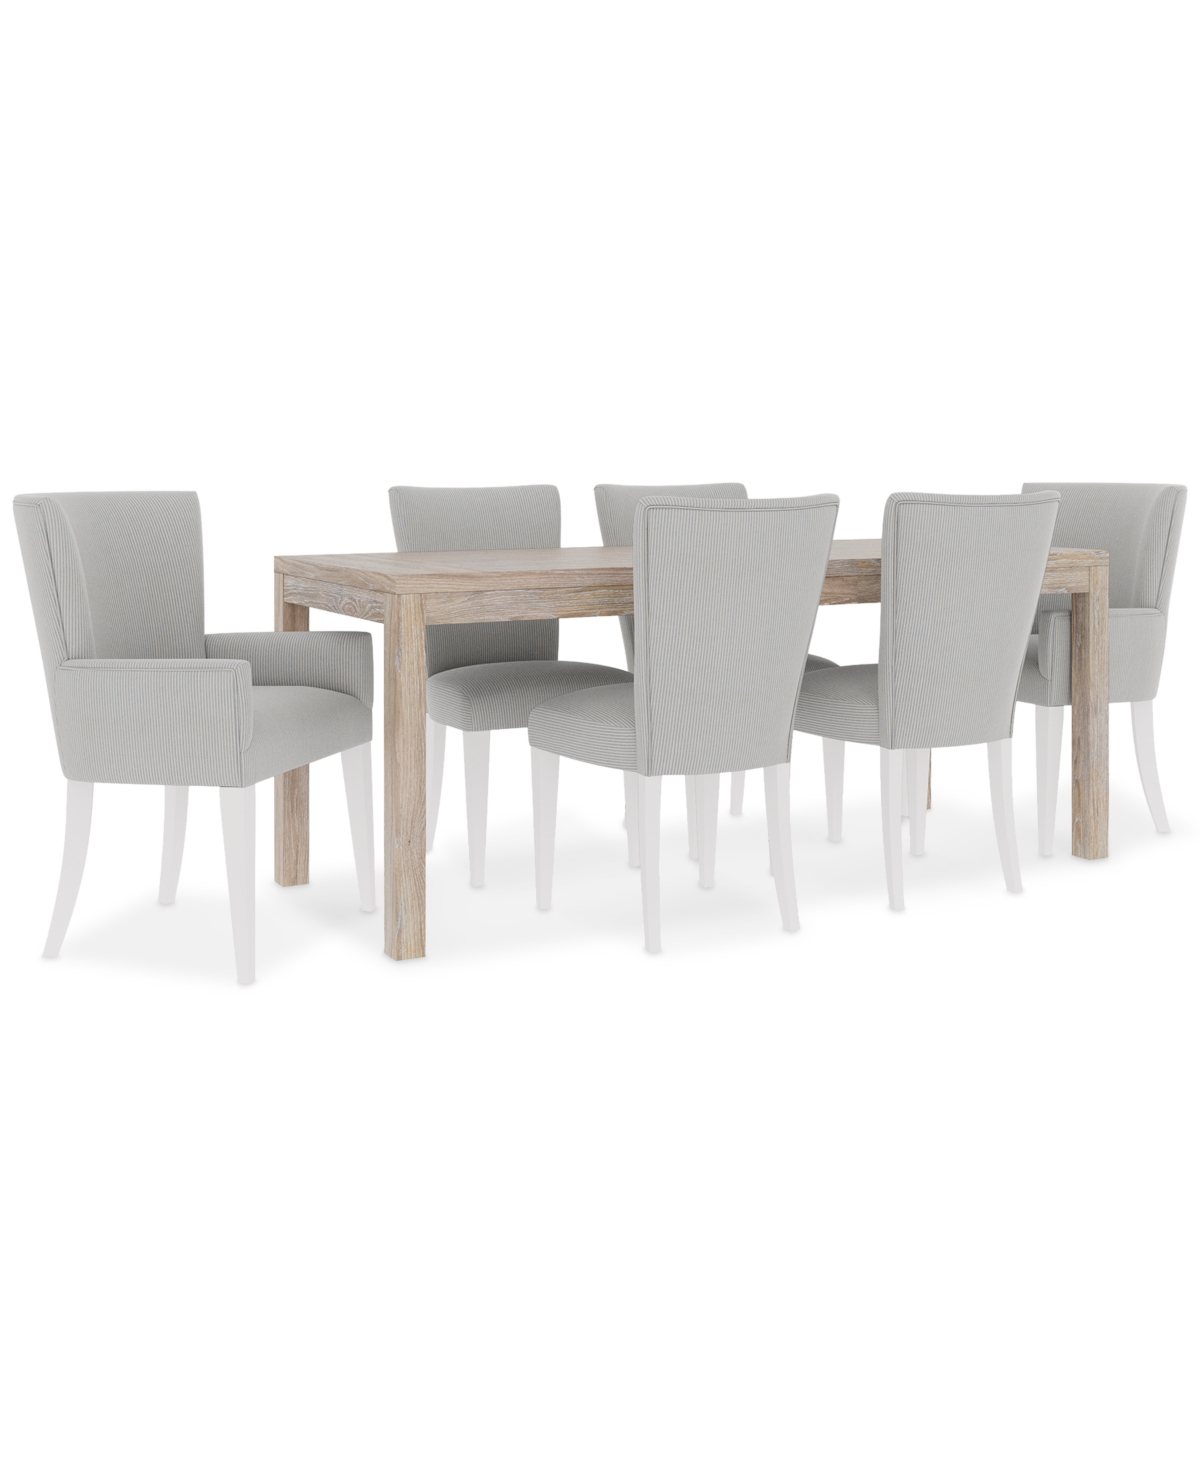 Shop Macy's Catriona 7pc Dining Set (rectangular Dining Table + 4 Upholstered Side Chairs + 2 Upholstered Arm Ch In No Color